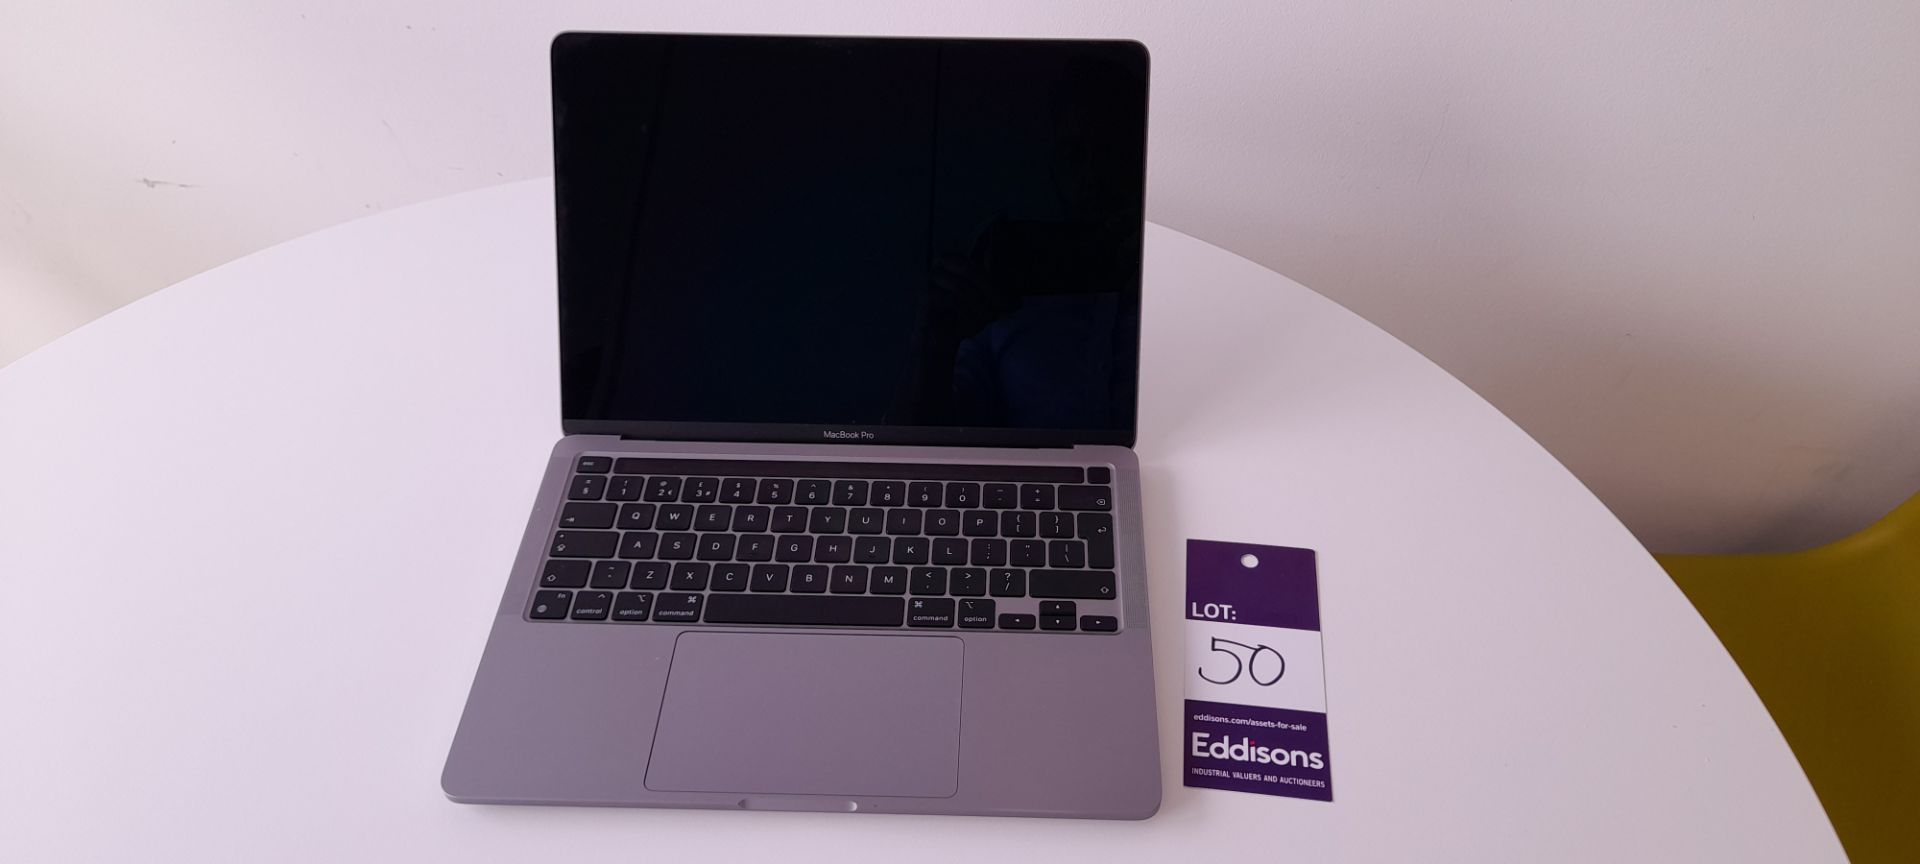 Apple MacBook Pro Model A2338 EMC3578. S/N FVFGXTD4Q05. Collection from Canary Wharf, London, E14